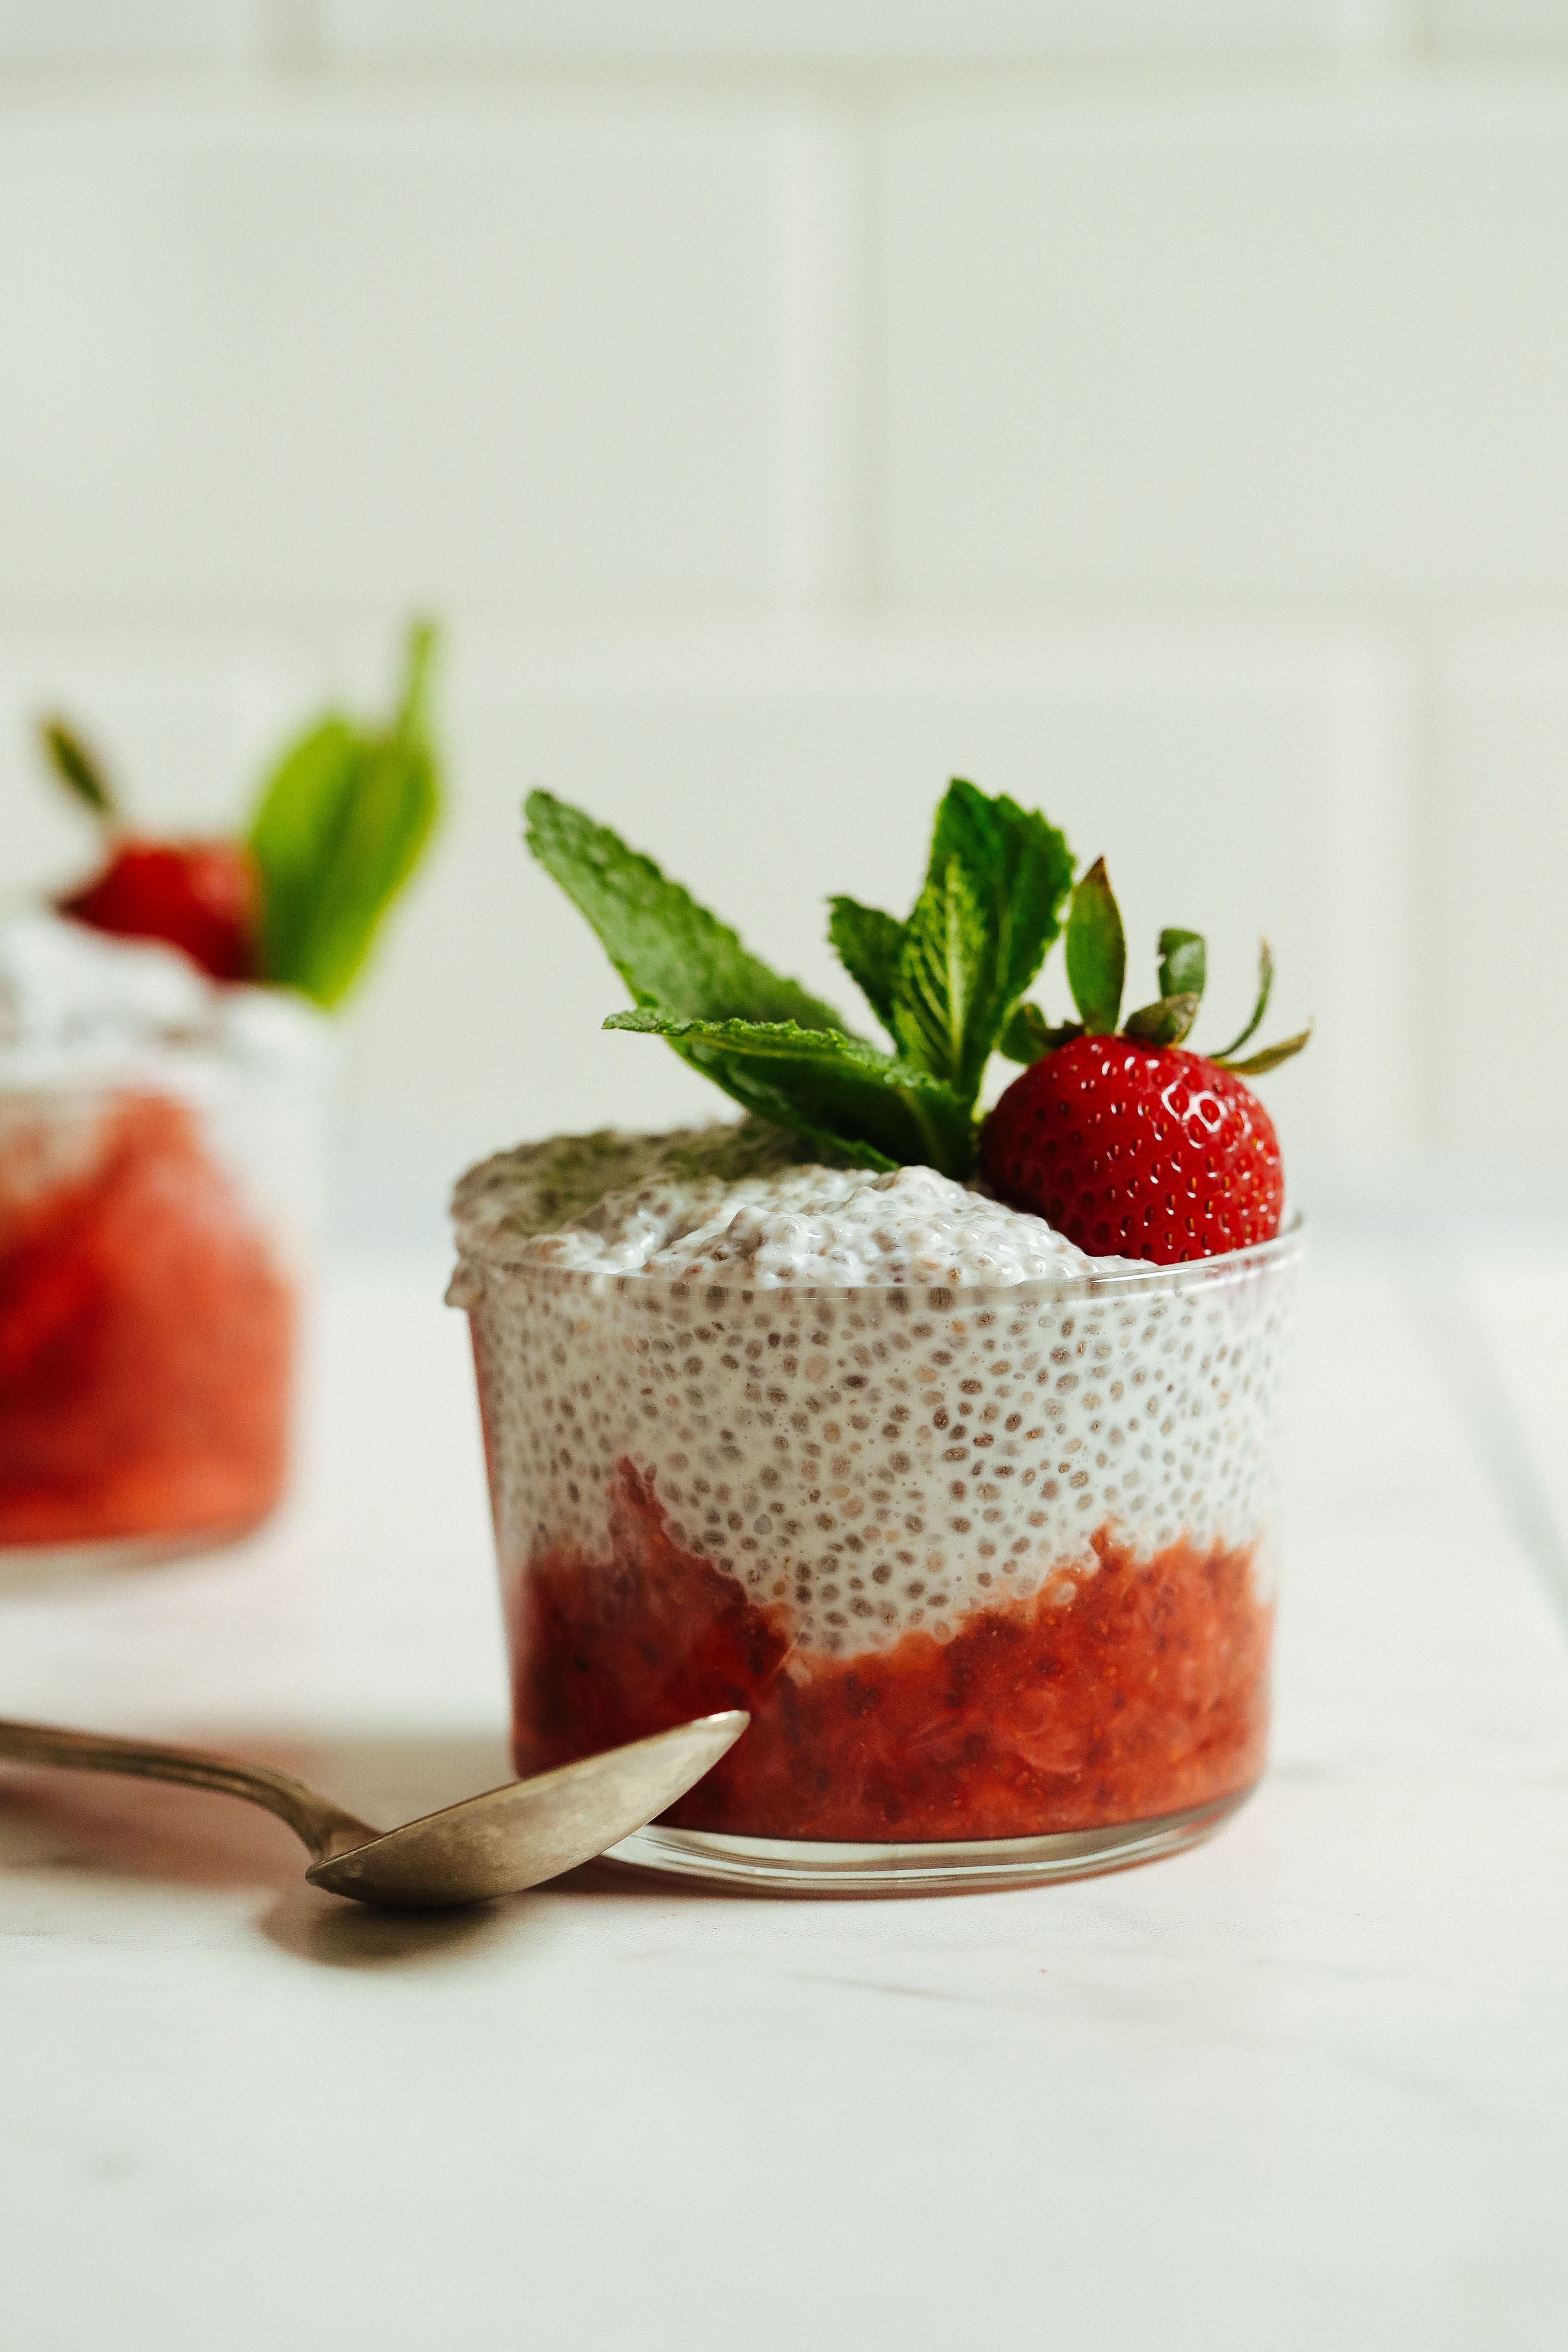 Berry compote with chia pudding a fresh strawberry and fresh mint